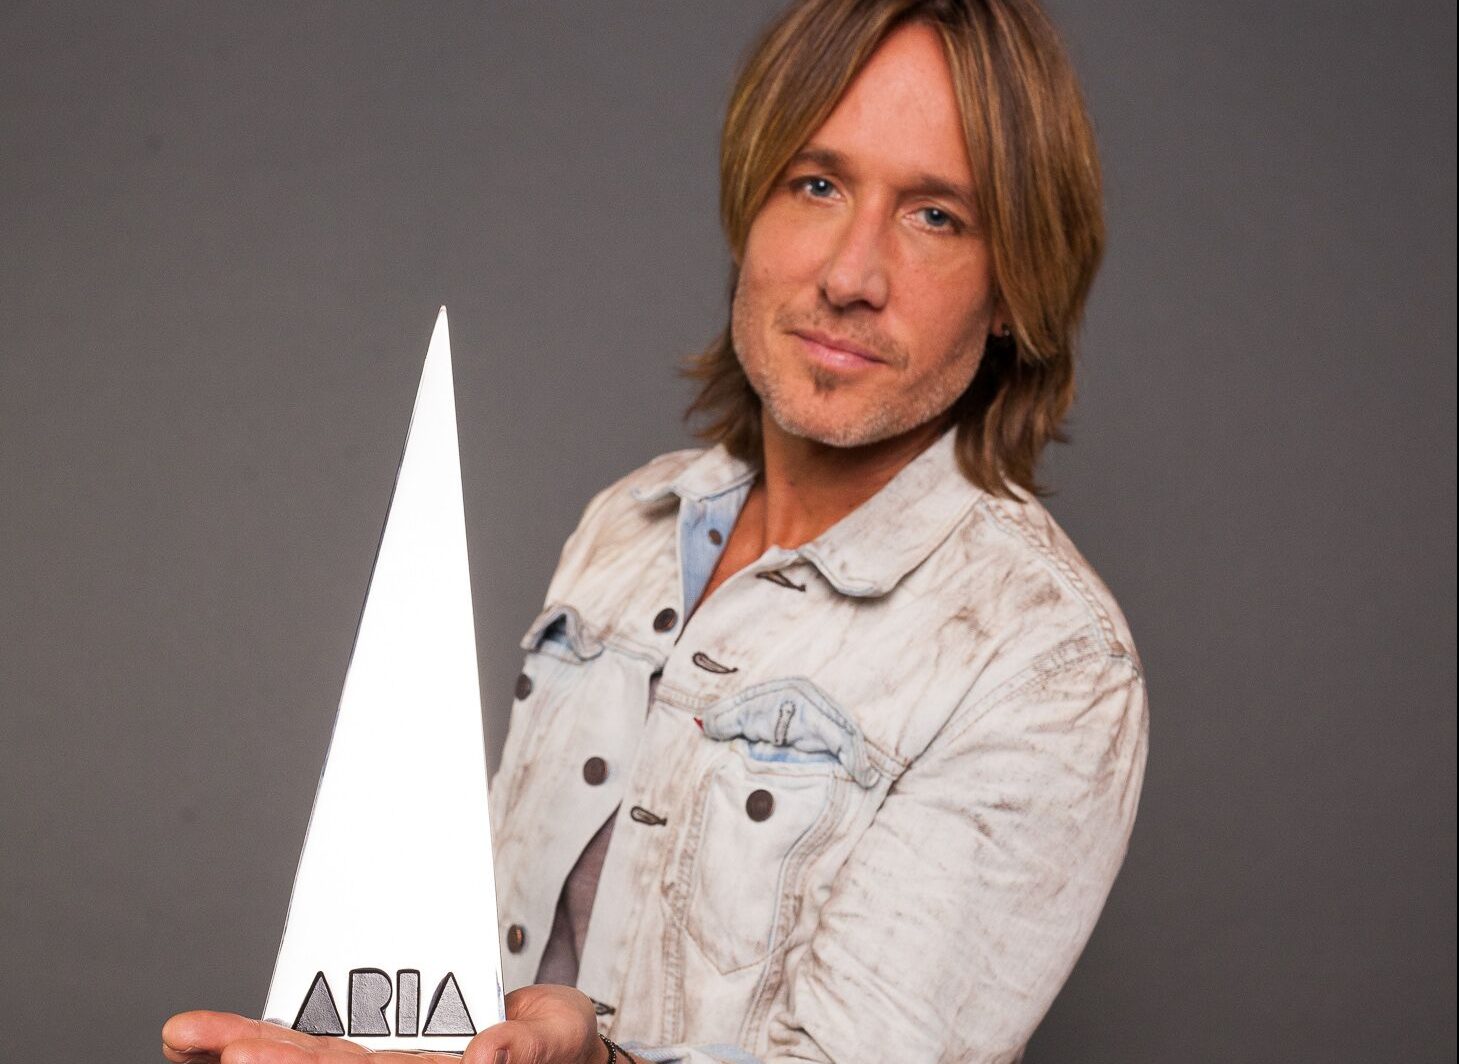 Keith Urban to host the 32nd Annual ARIA Awards